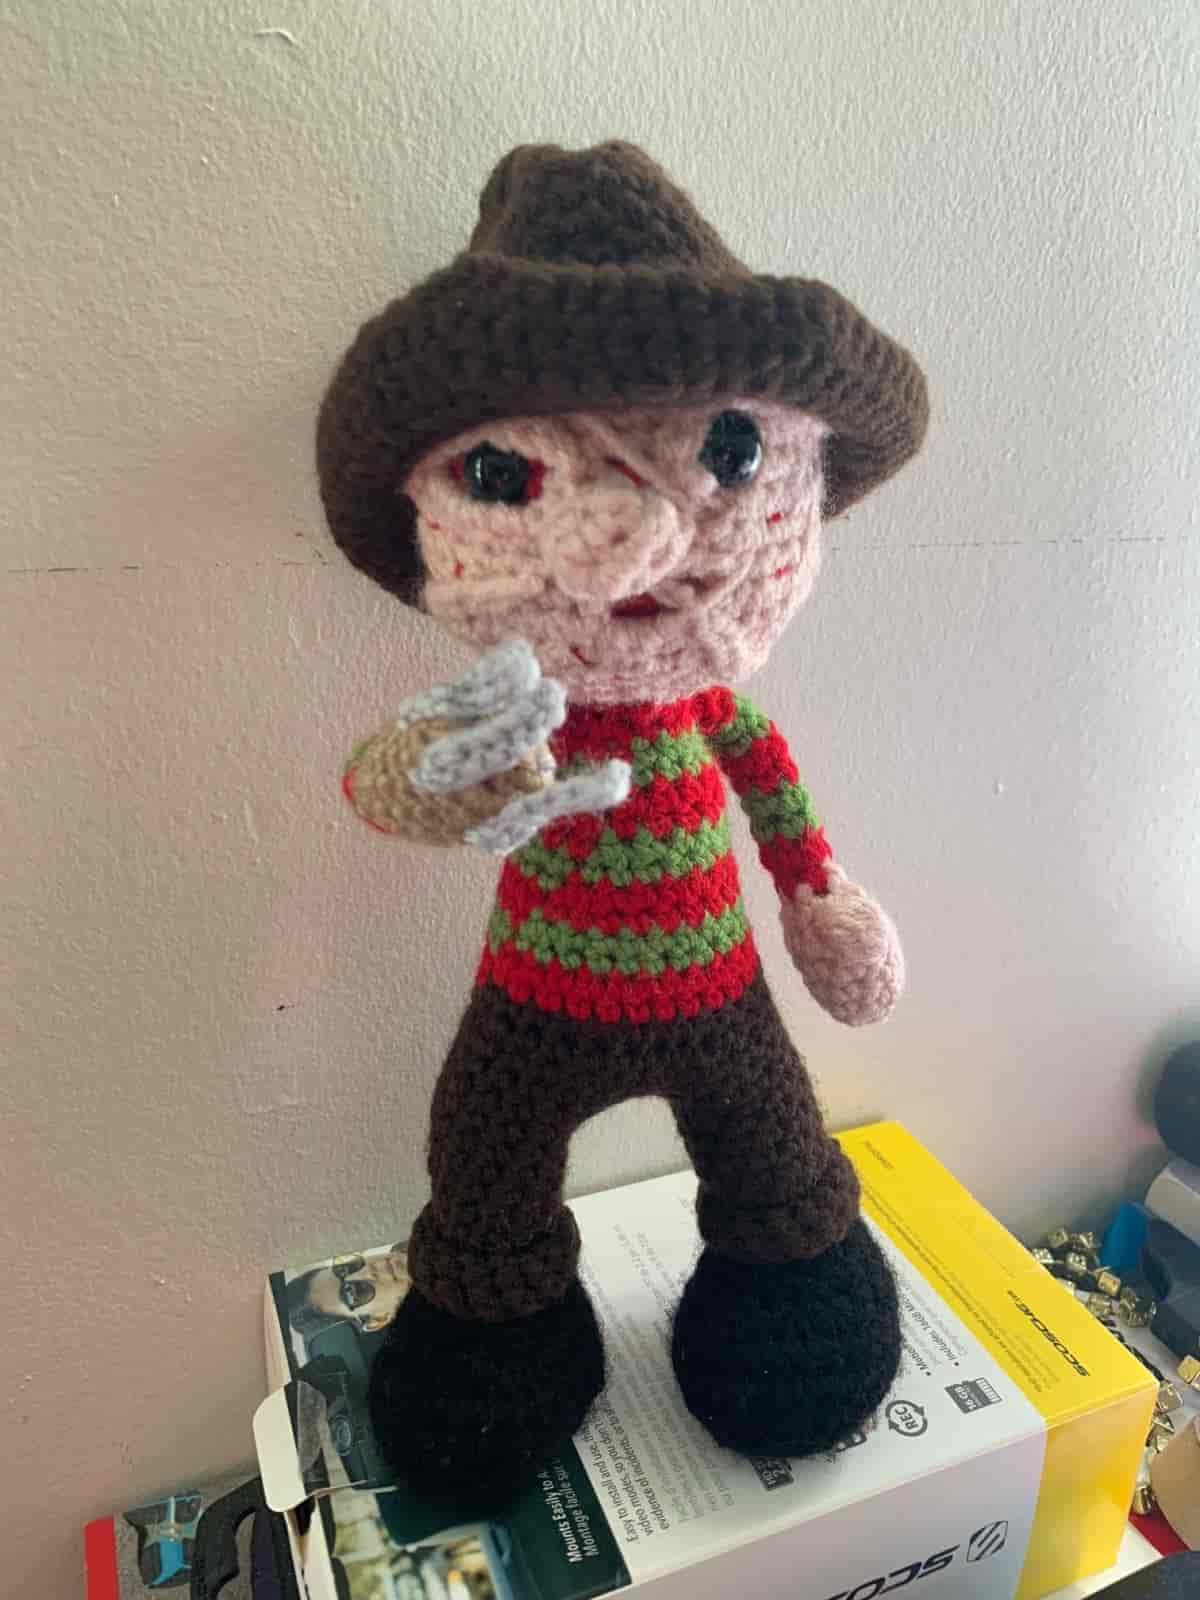 Amigurumi Freddy Krueger Crochet Pattern Review by Brianne Blaikie for Cottontail Whiskers